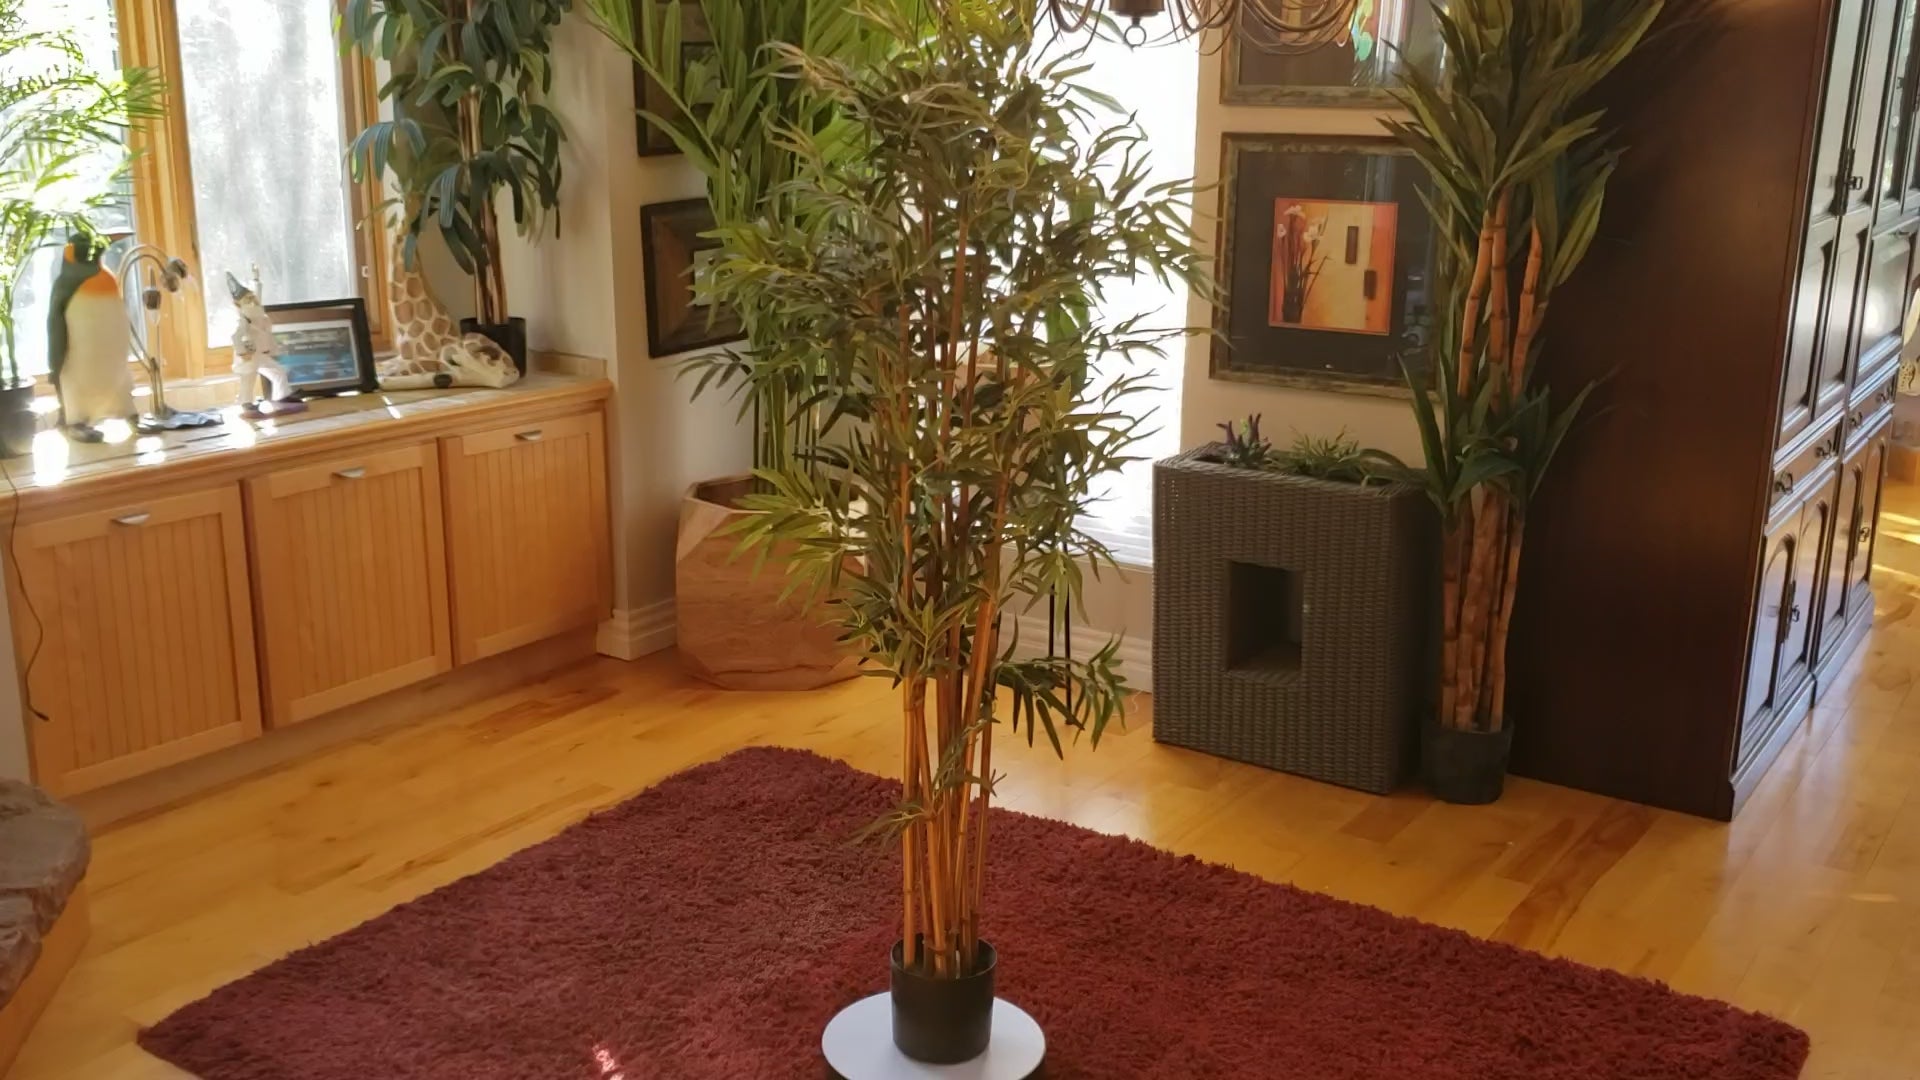 Auction for sale bamboo tree